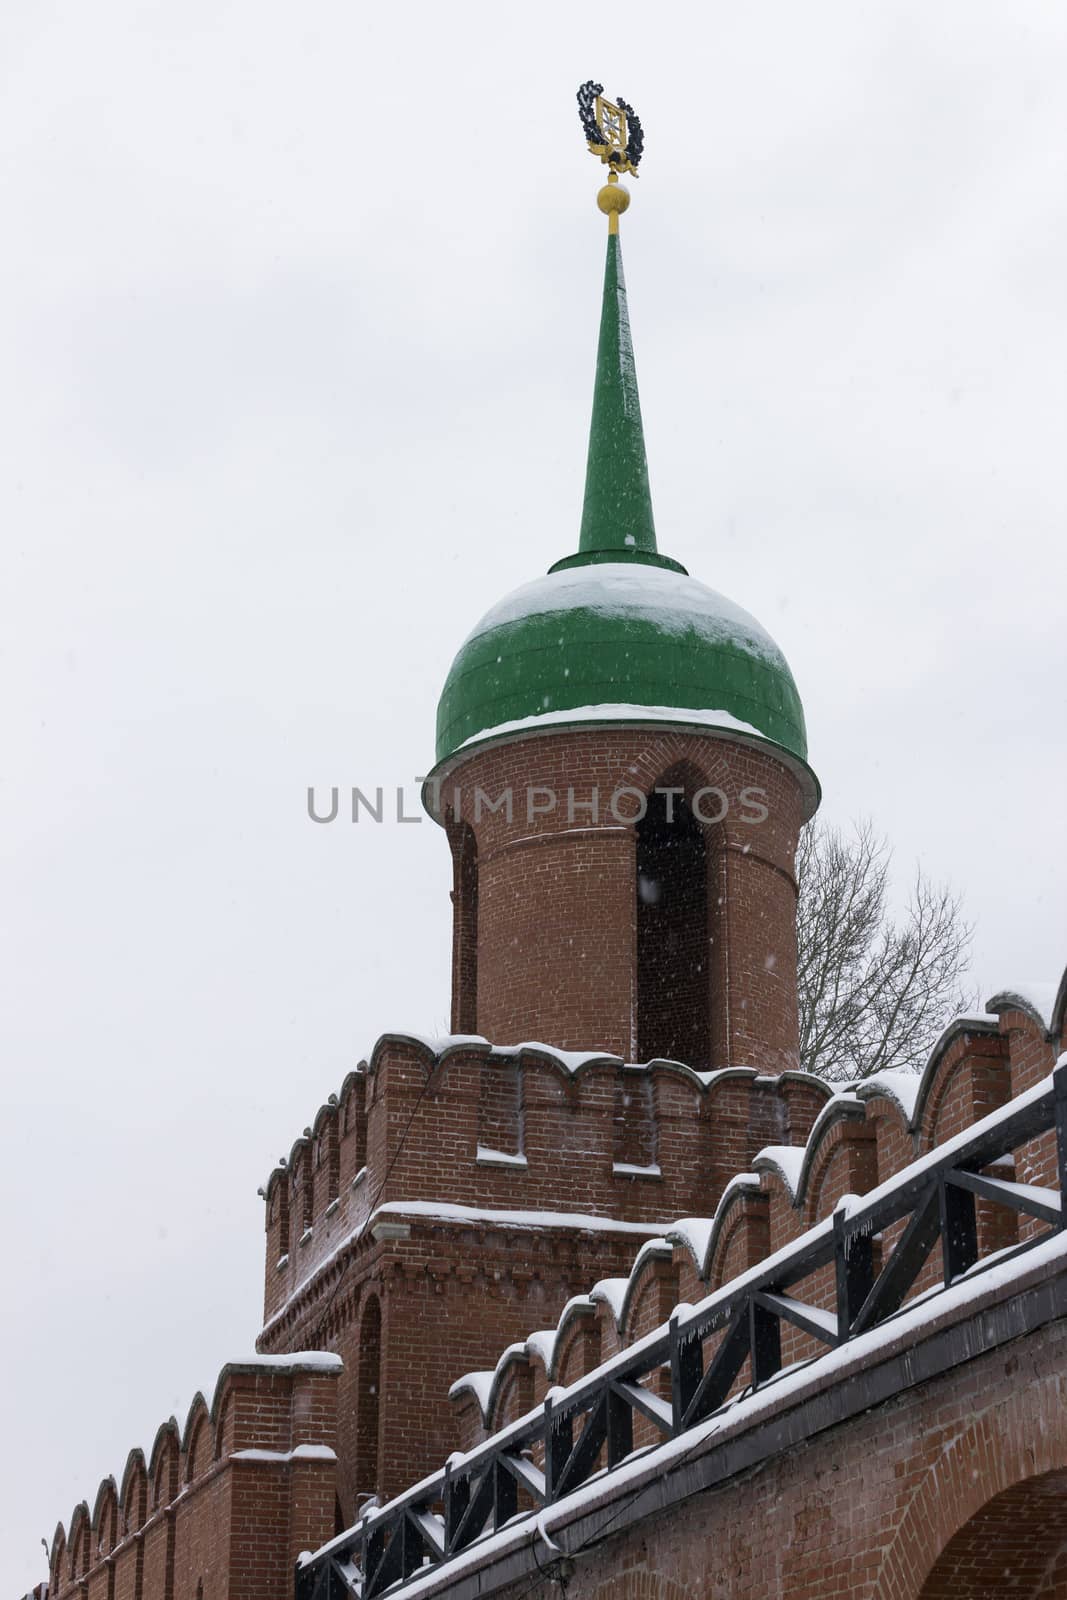 Architectural monument: Odoyevsky gate tower of Tula Kremlin in winter 2018. by mb71ph